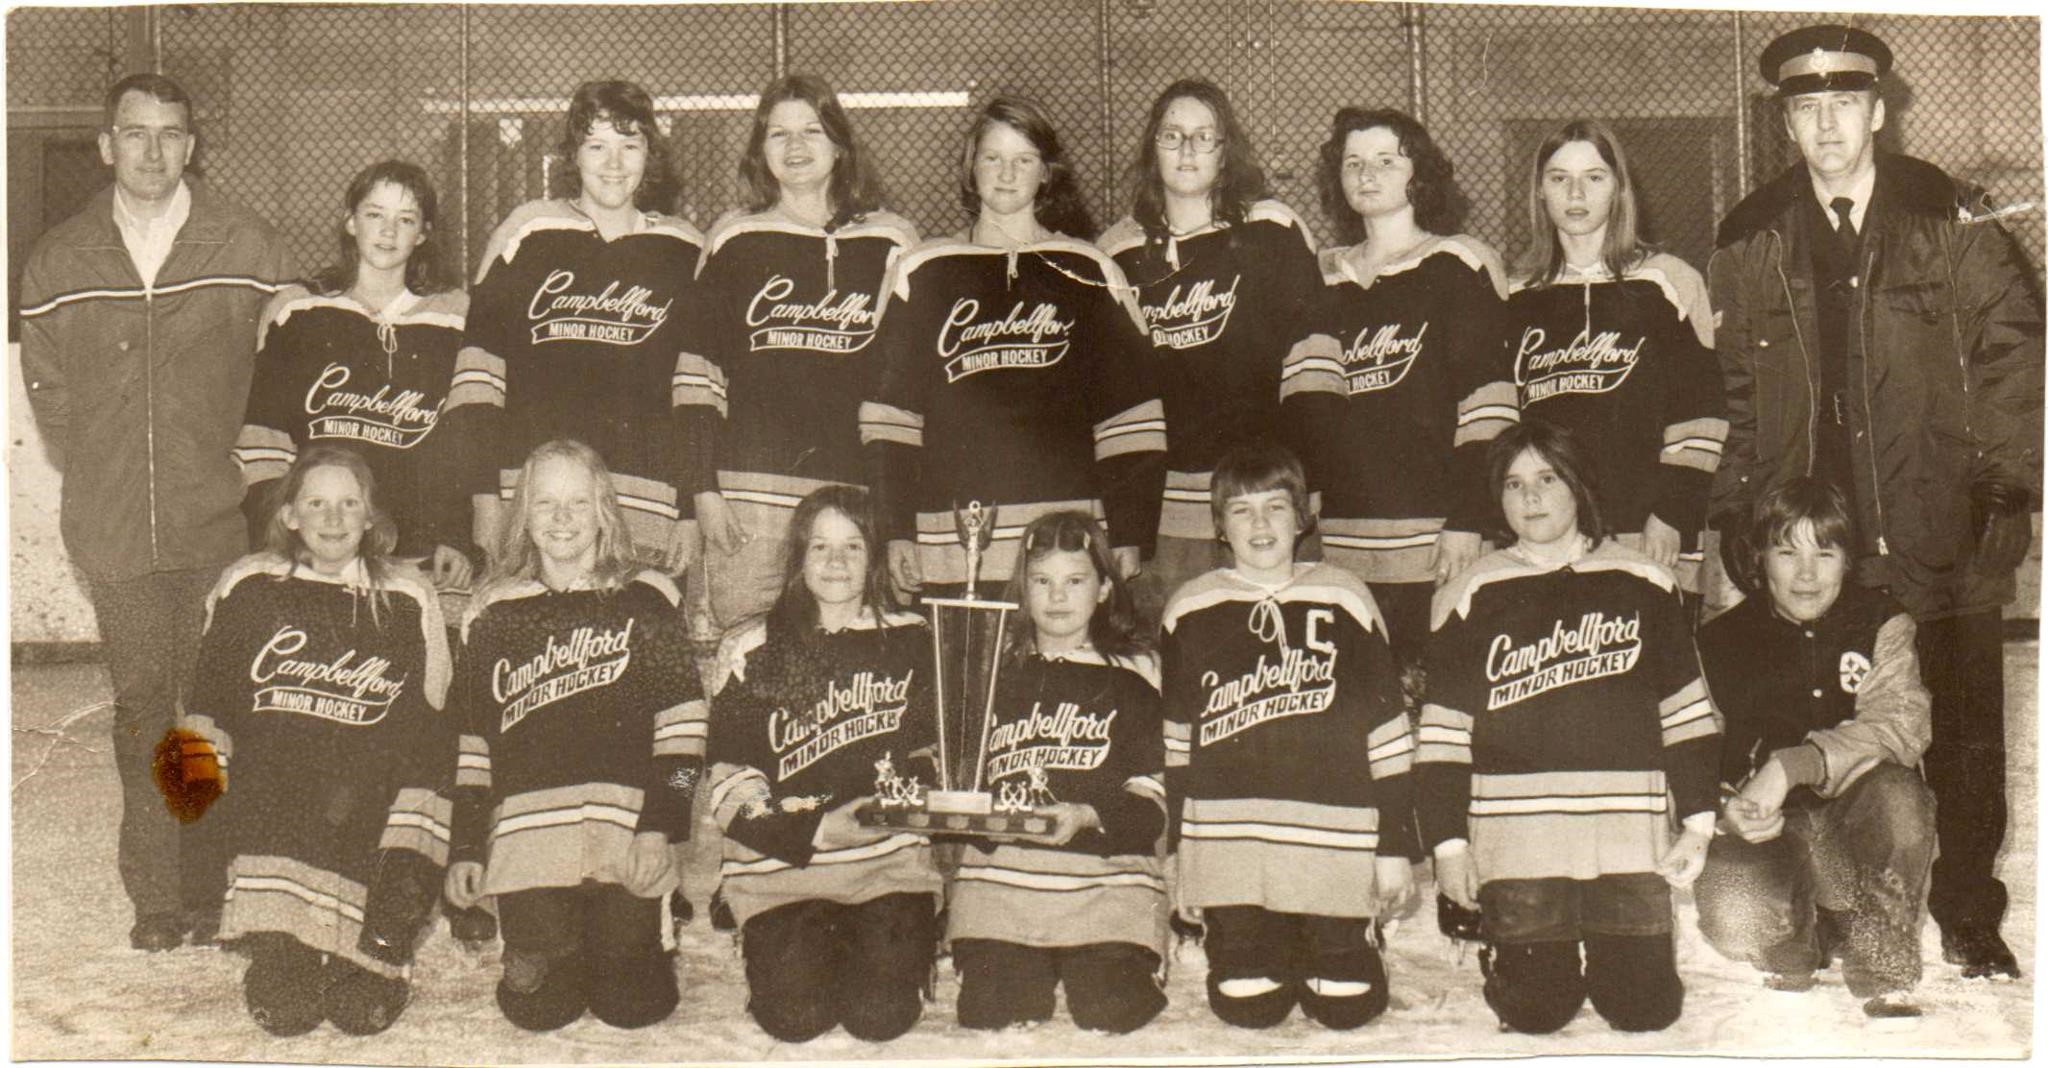 A sepia photo of a girls’ hockey team with Campbellford Minor Hockey written on their sweaters. 